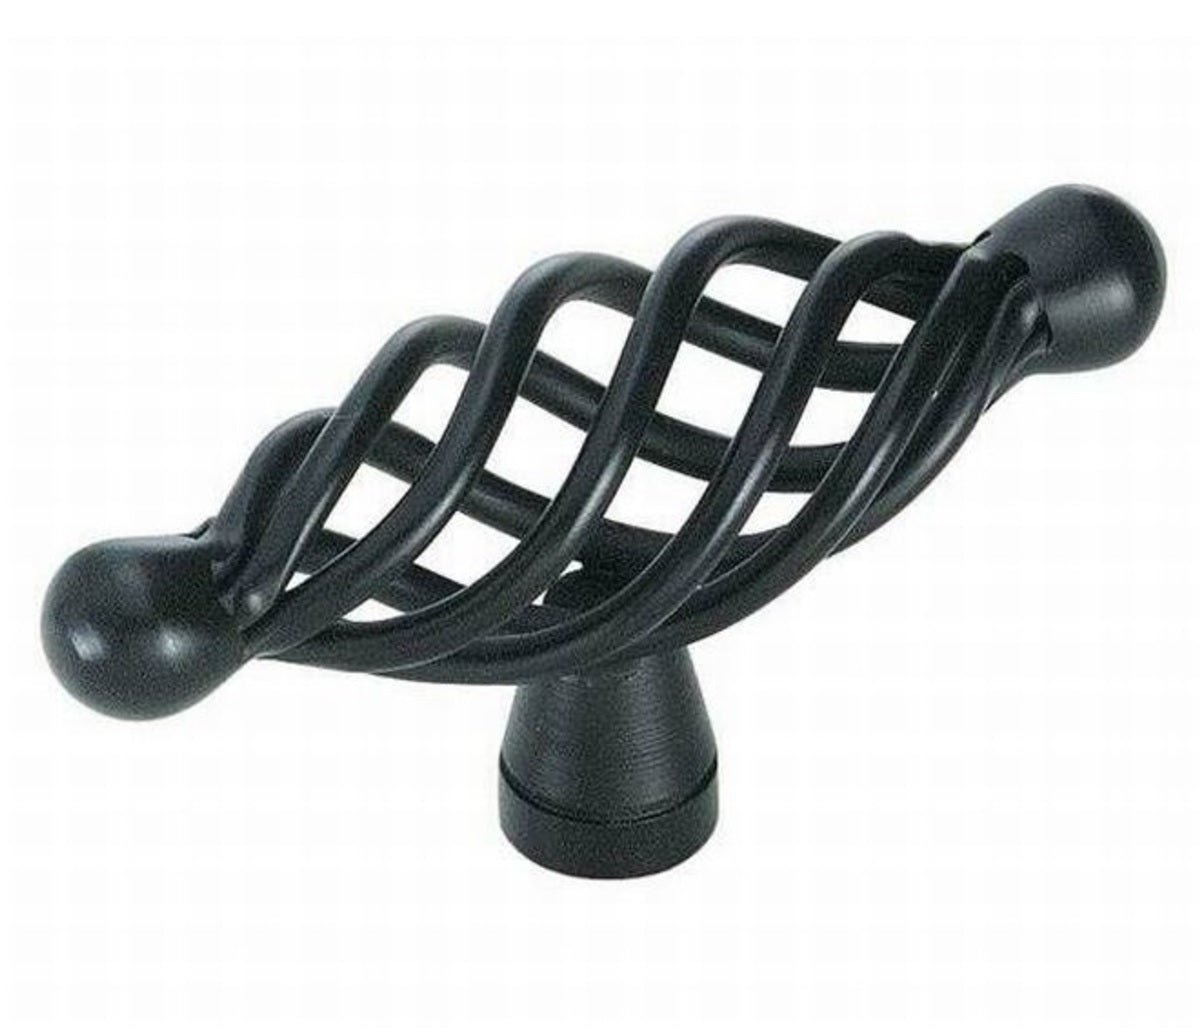 buy metal & cabinet knobs at cheap rate in bulk. wholesale & retail construction hardware equipments store. home décor ideas, maintenance, repair replacement parts